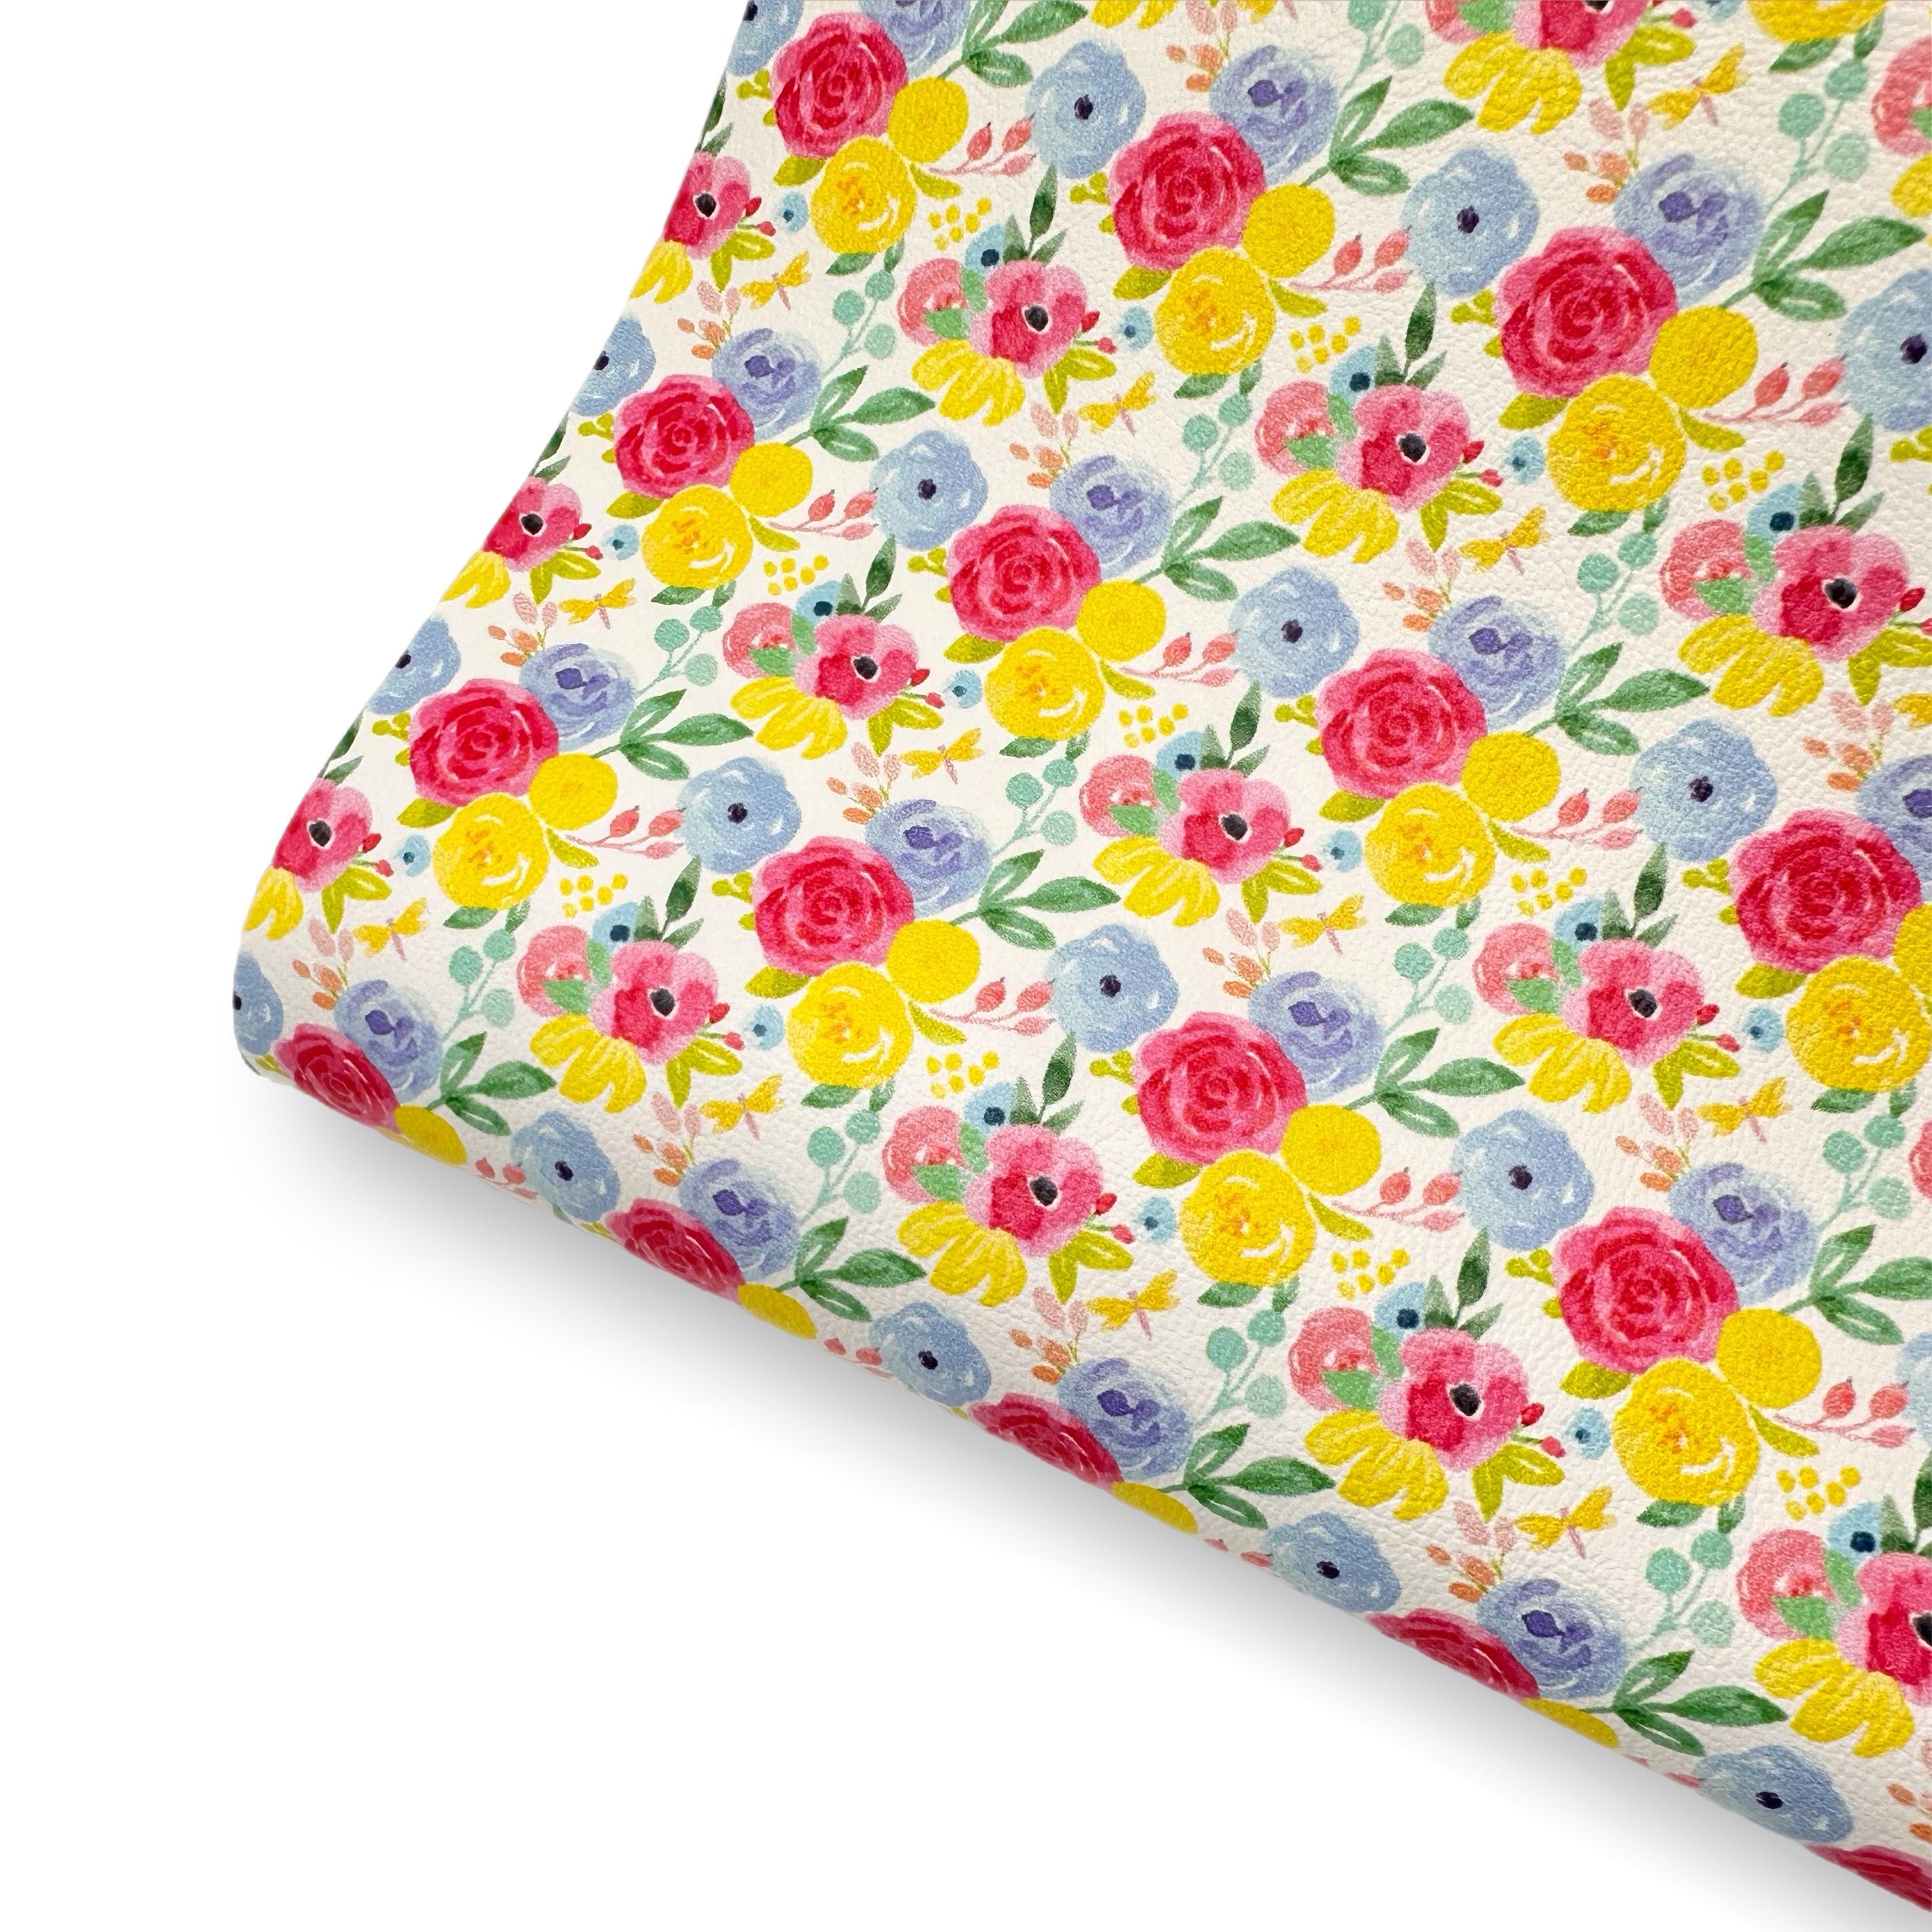 Summer Bright Blooms Premium Faux Leather Fabric